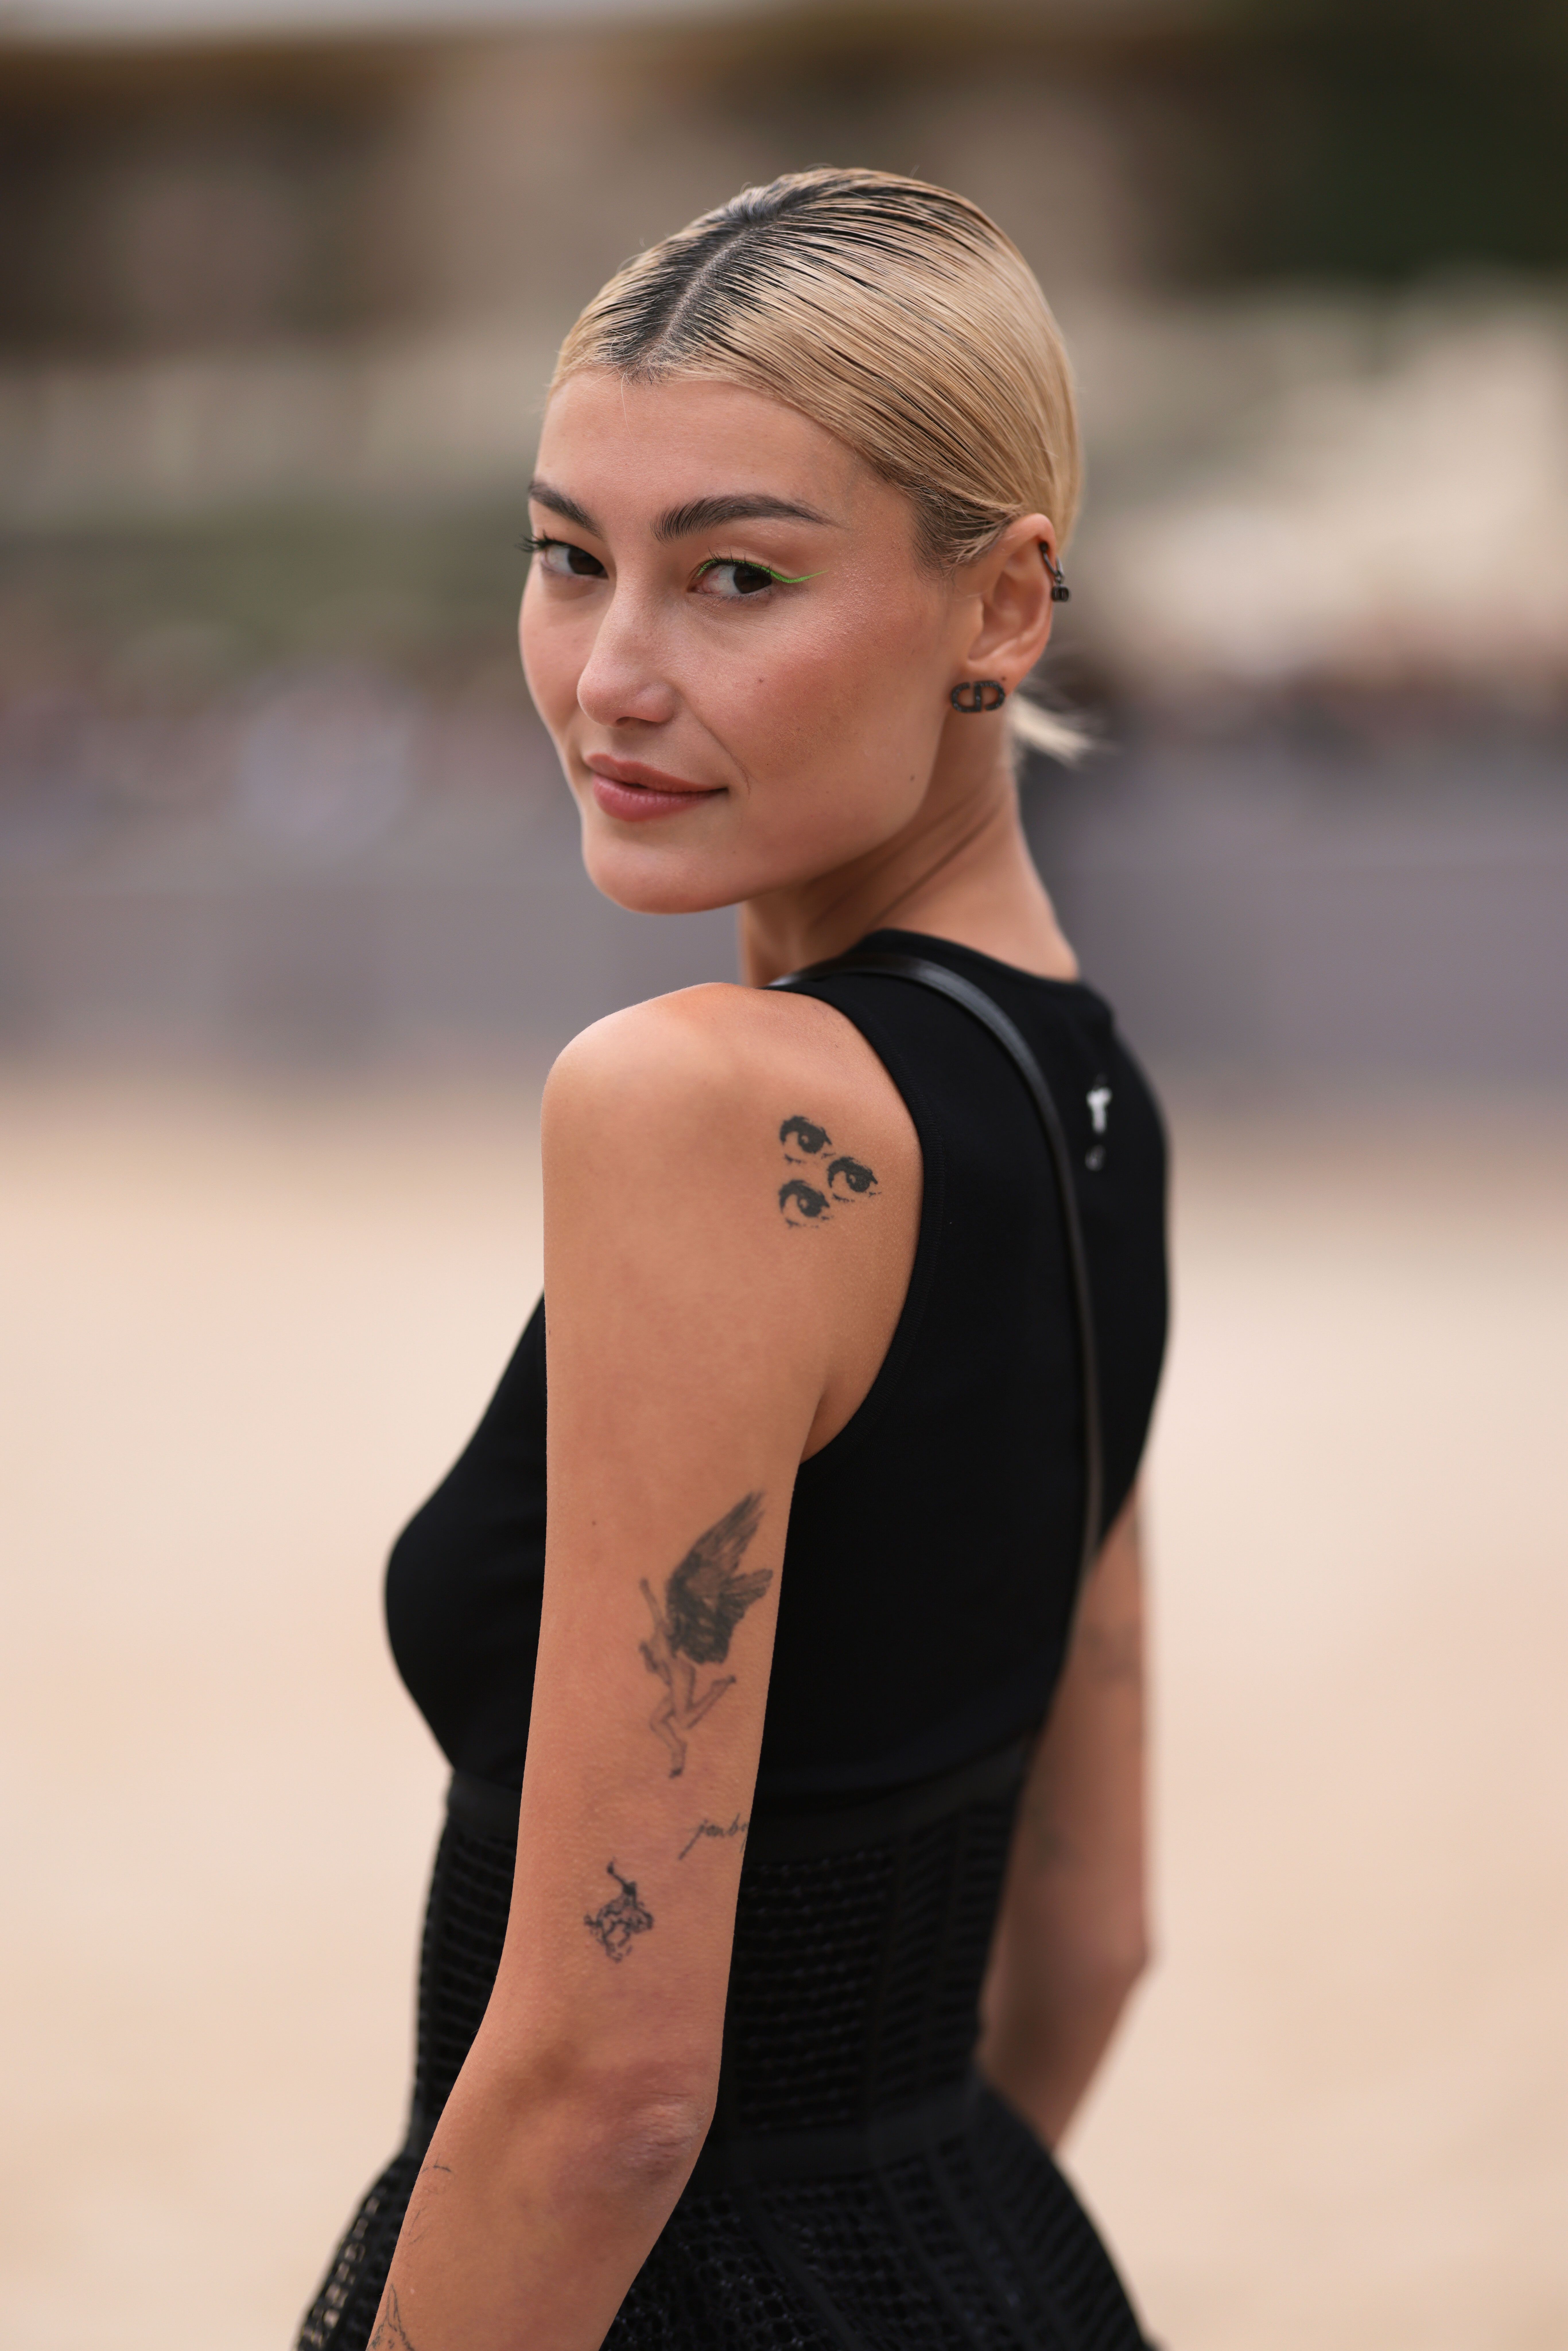 Makeup That Covers Up Tattoos - 7 Product Recommendations From Tattoo Experts